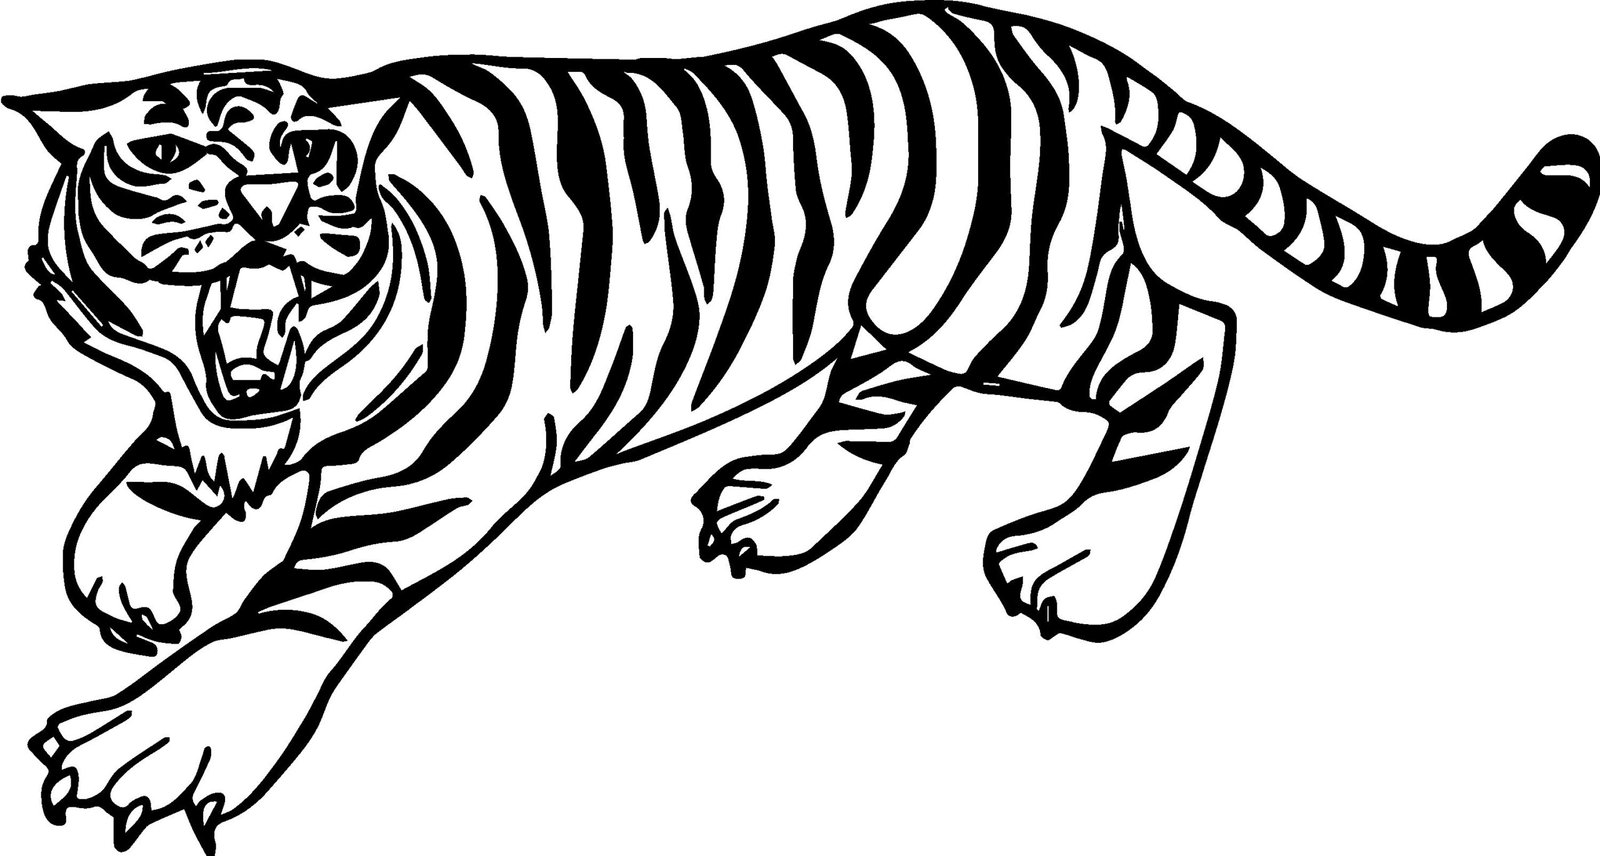 37 Tips With Coloring Pages For Kids Tiger Session Words In 